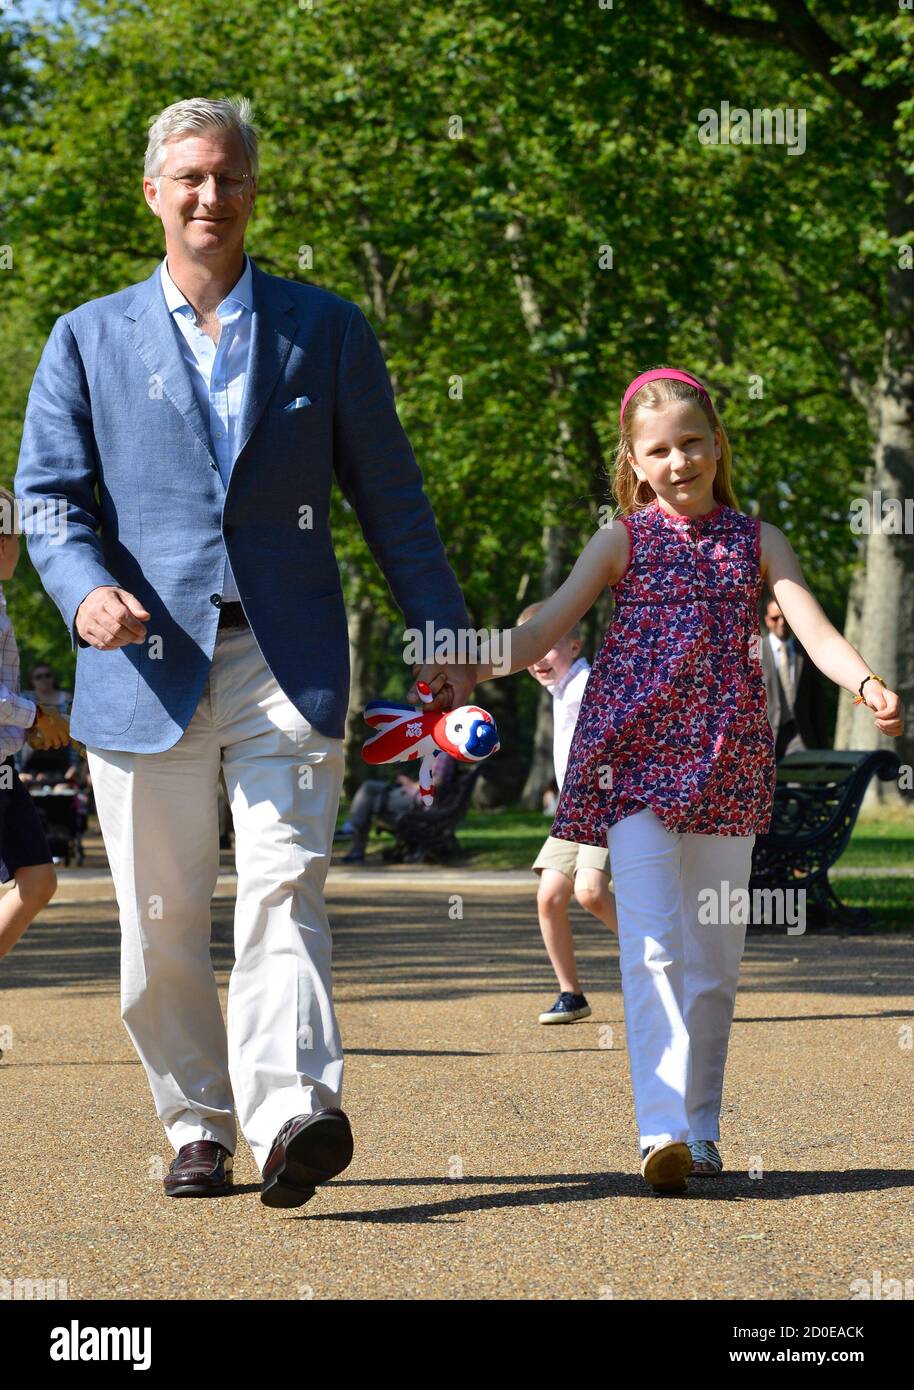 Belgium's Crown Prince Philippe (L) and Princess Elisabeth (R) visit central London ahead of the London 2012 Olympic Games July 26, 2012. Picture taken on July 26, 2012.                REUTERS/Benoit Doppagne/Pool    (BRITAIN  - Tags: SPORT ROYALS POLITICS SPORT OLYMPICS) Stock Photo